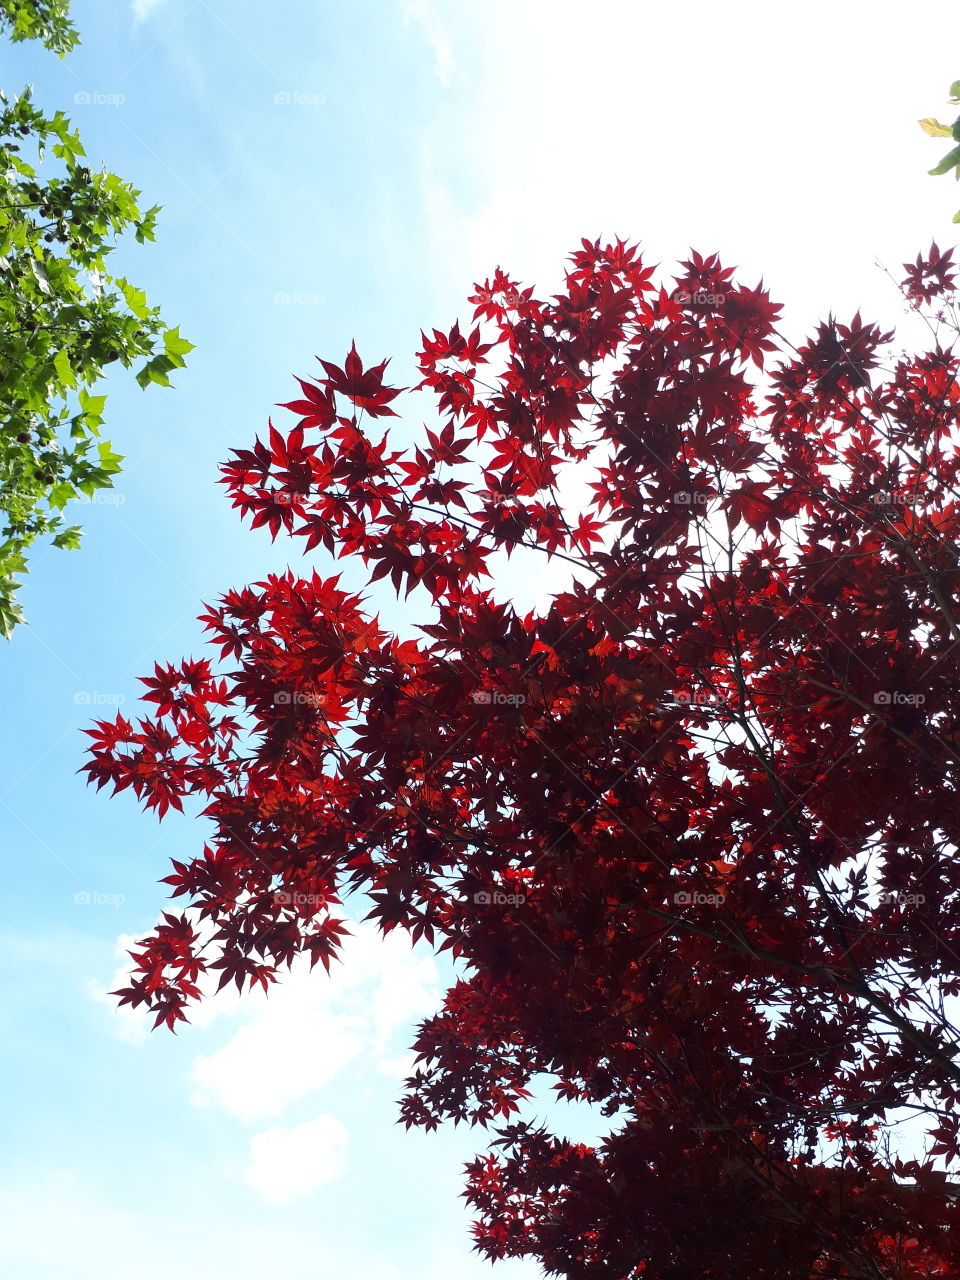 Tree with red leaves and tree with green leaves on the background of the blue sky